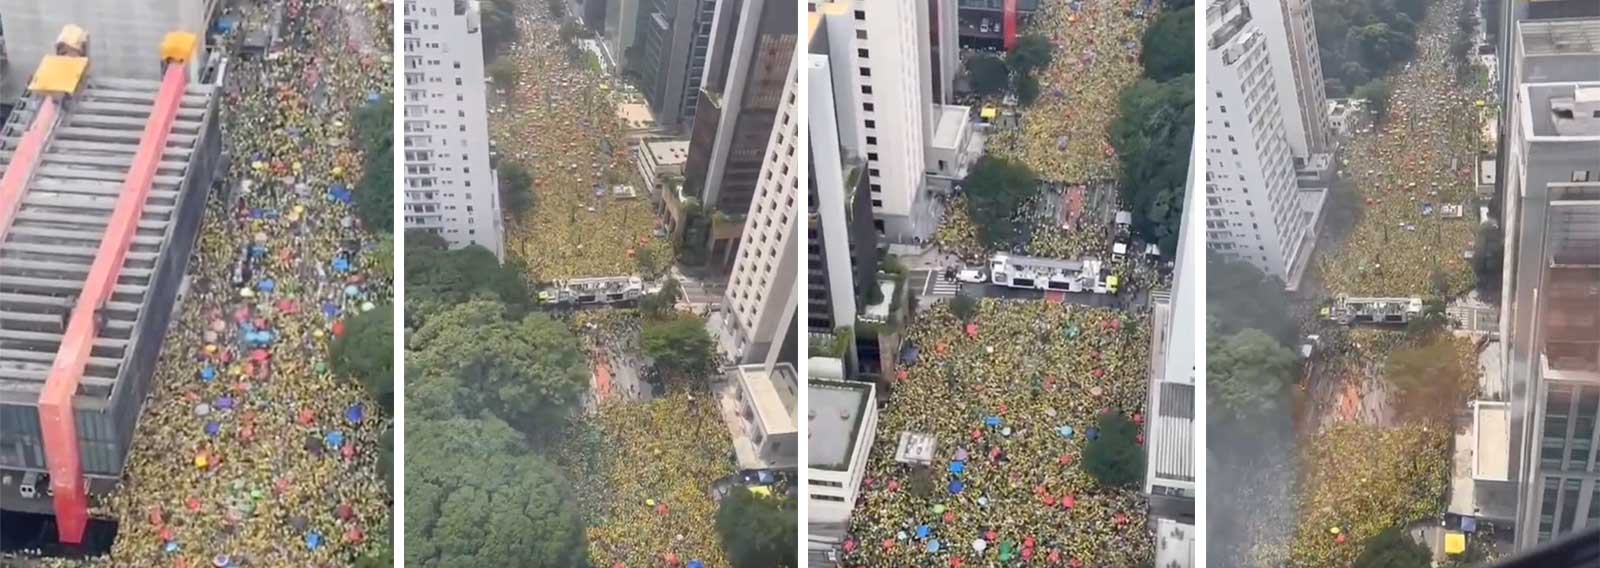 ‘For Freedom and Democracy’: A Million Brazilians March Against President Lula’s Authoritarian Regime